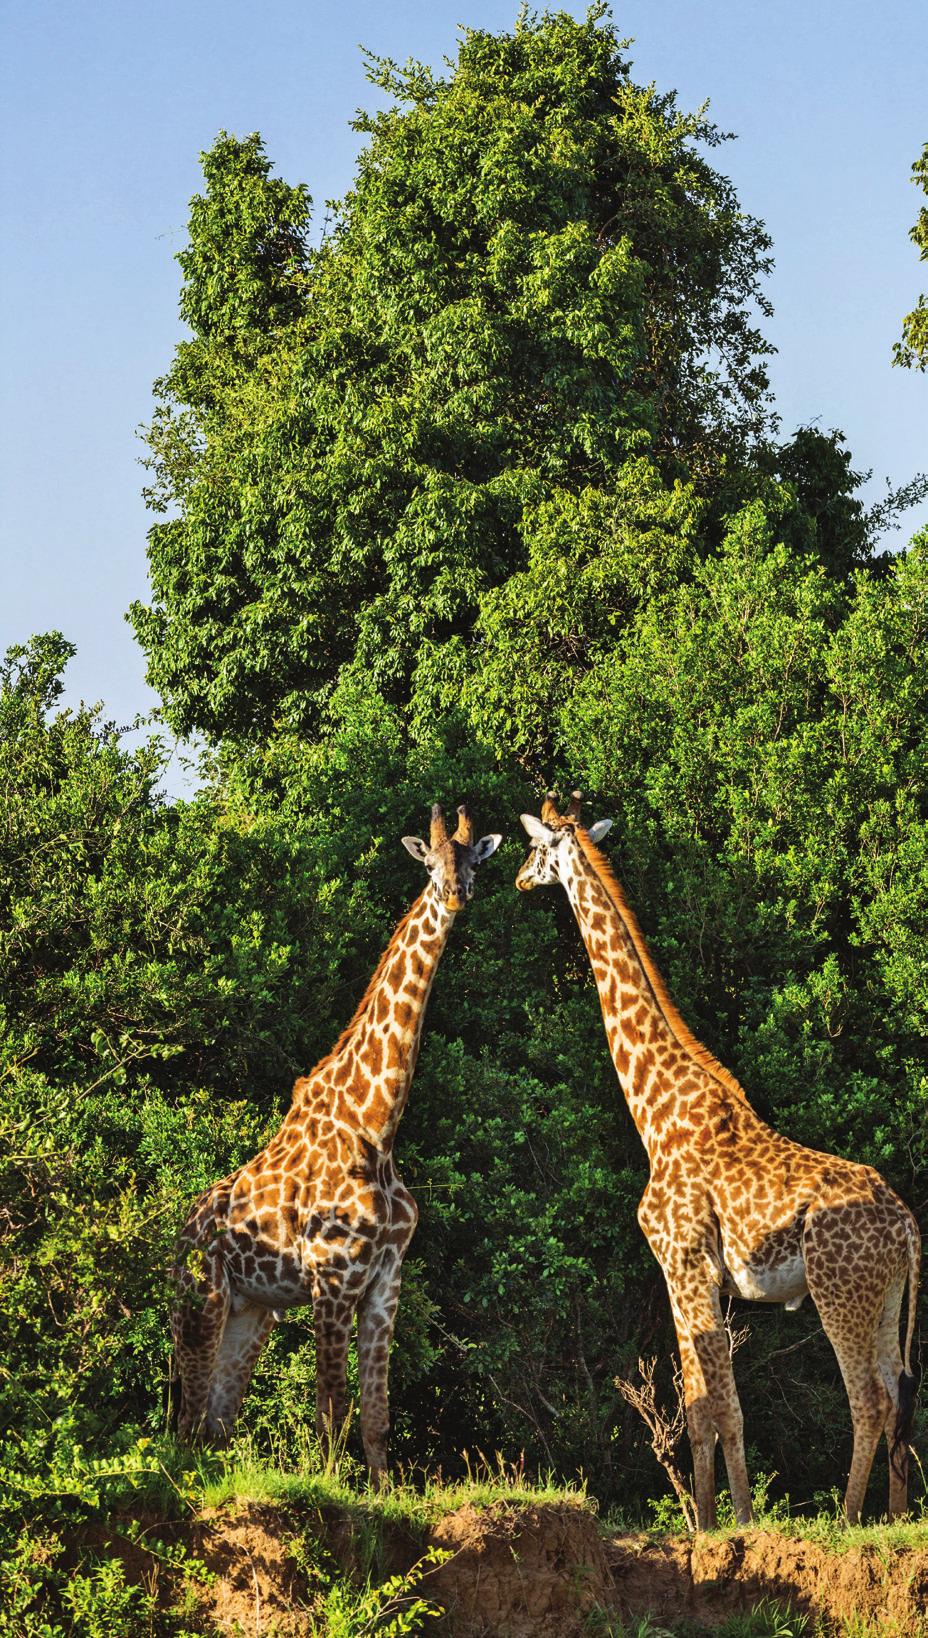 Tour membership limited to 18 Duke alumni and friends lakes, forest, mountains, and unparalleled wildlife, including the rare black rhino, hippo, wildebeest, zebra, eland, gazelle, and black-maned